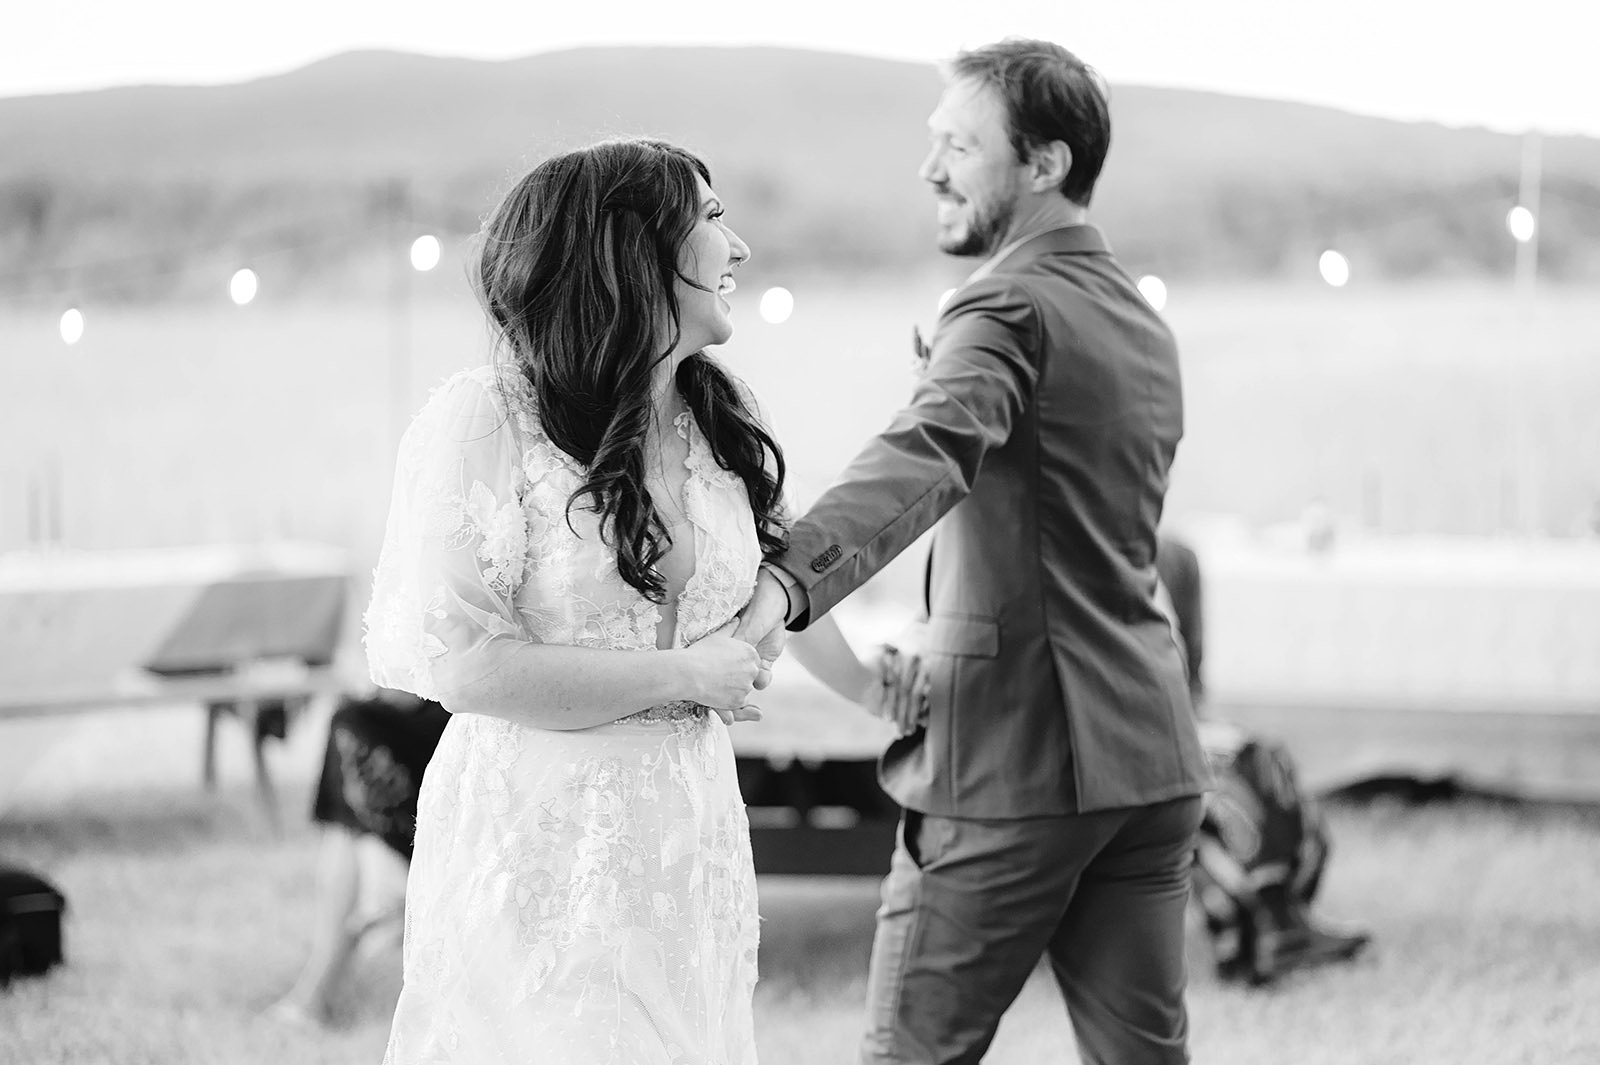 Bride and Groom's first dance - Trout Lake Wedding, WA